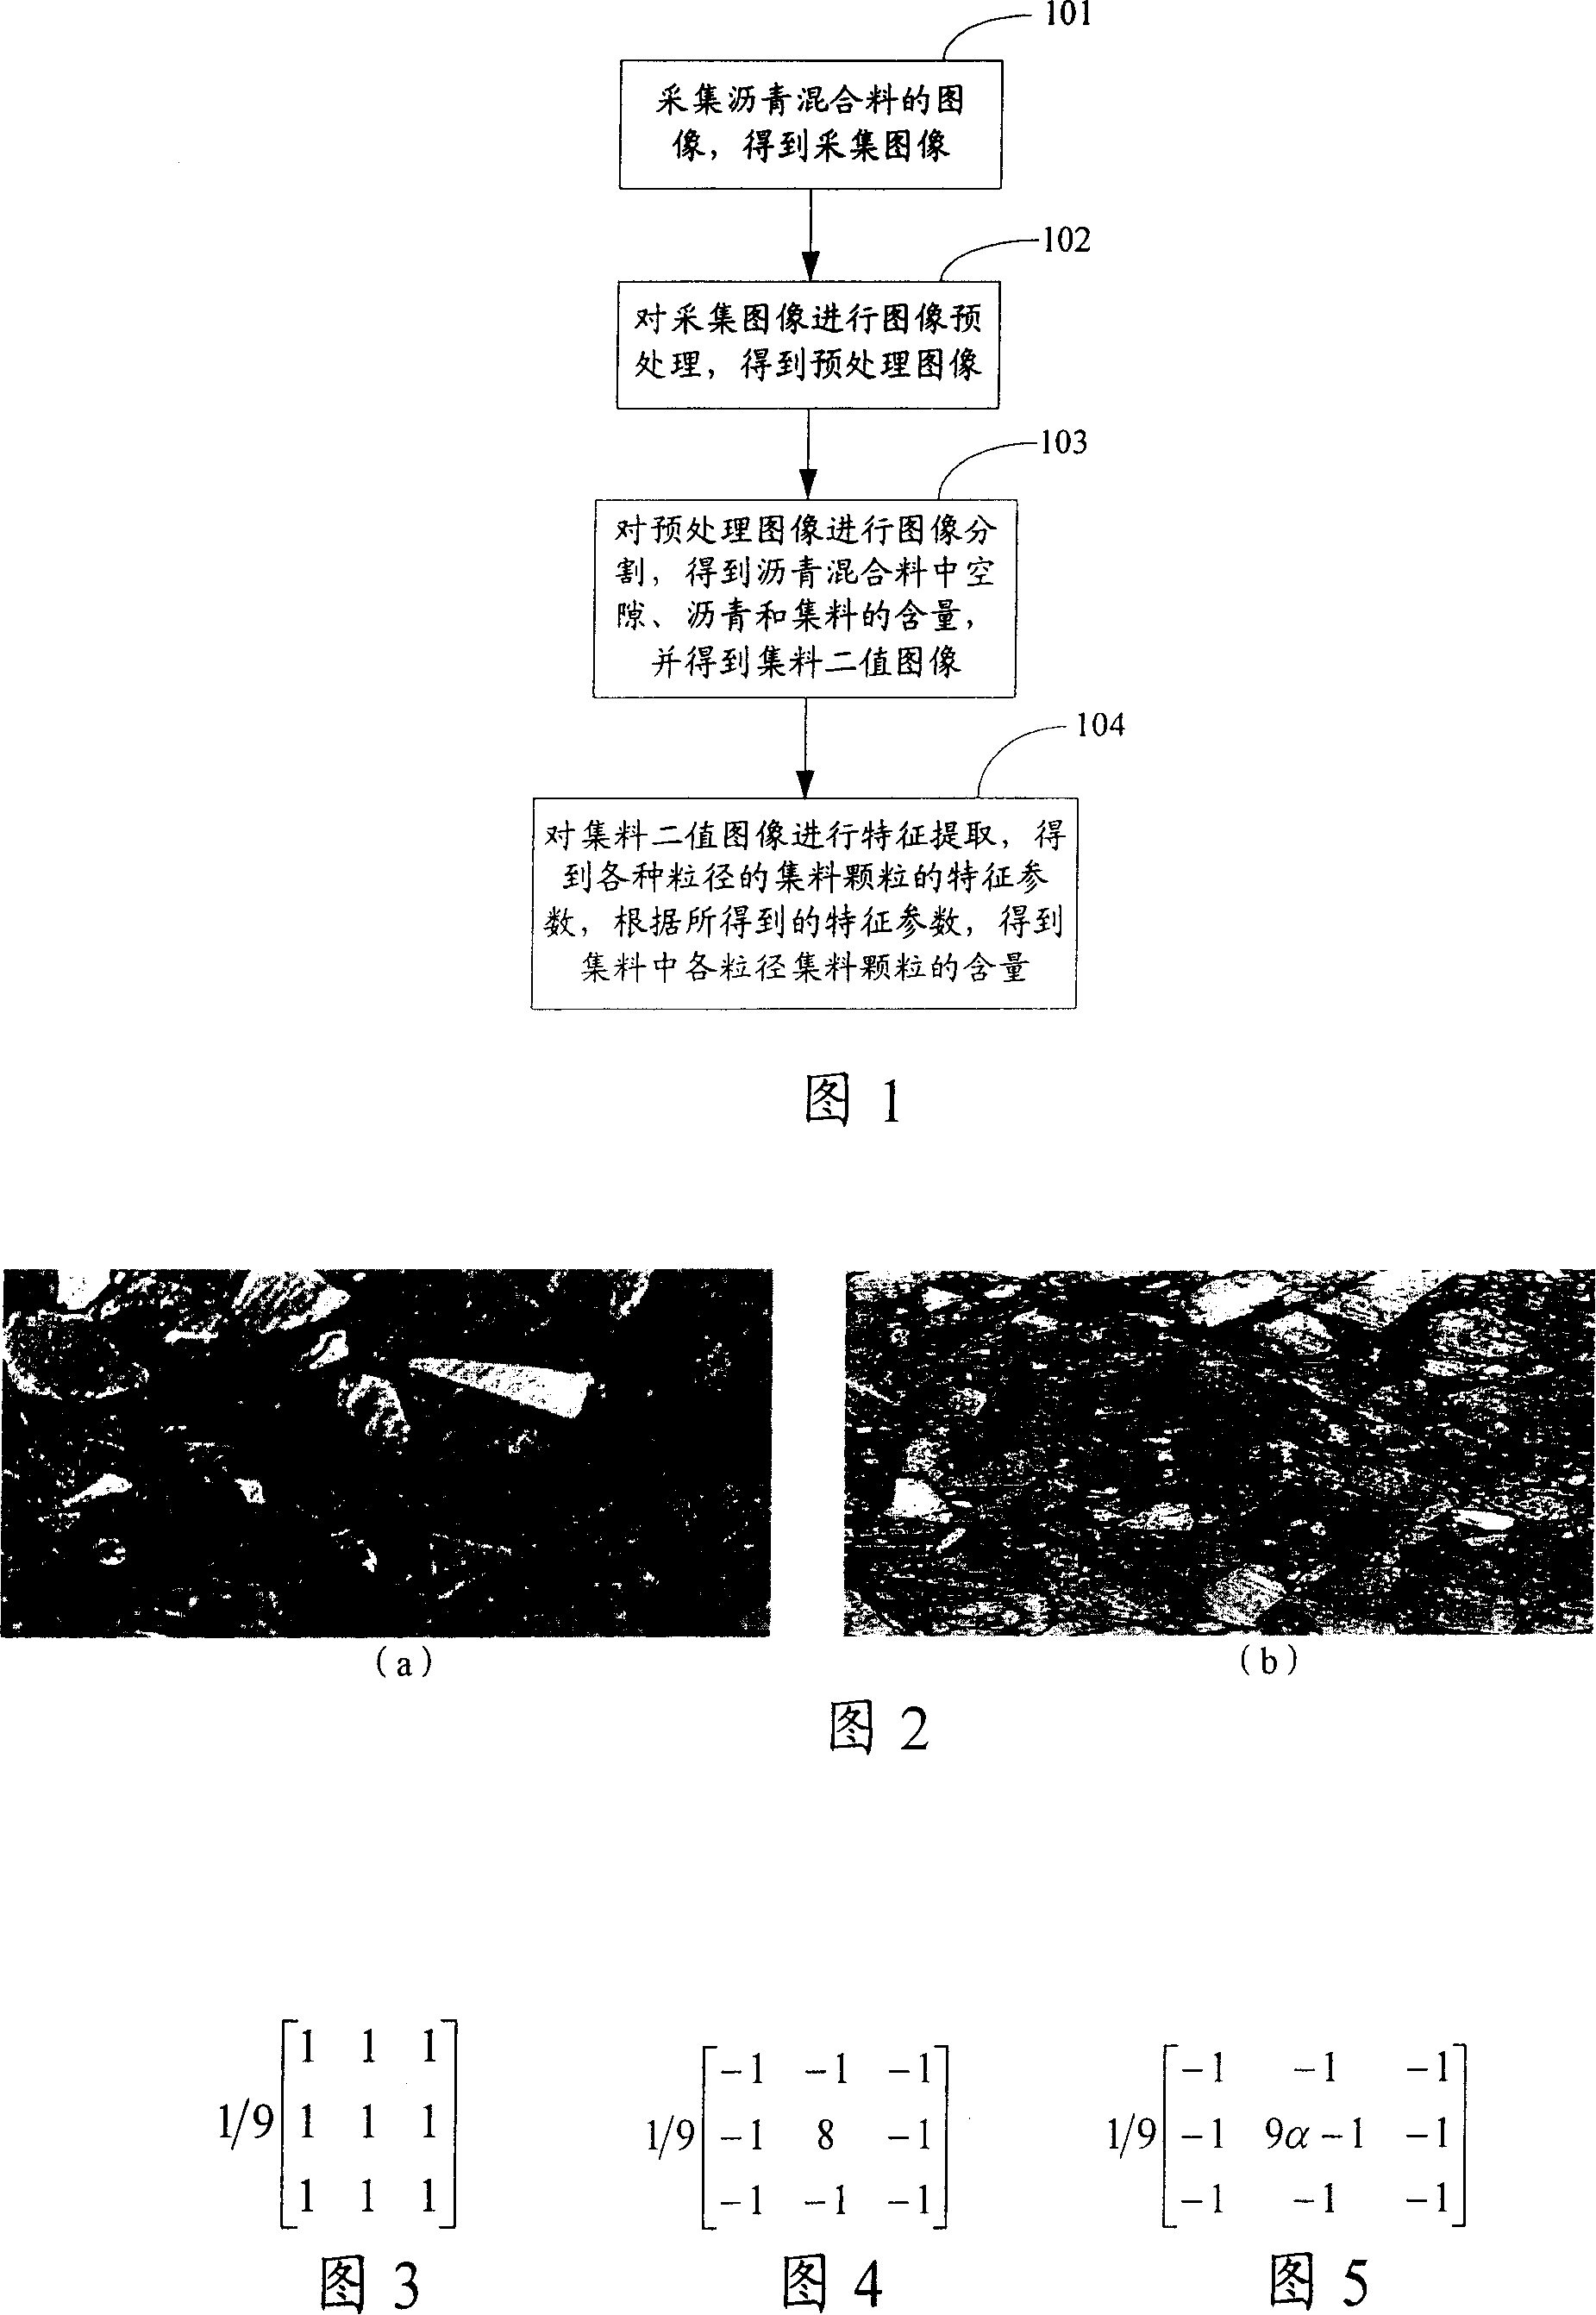 Method and system for detecting asphalt mixture